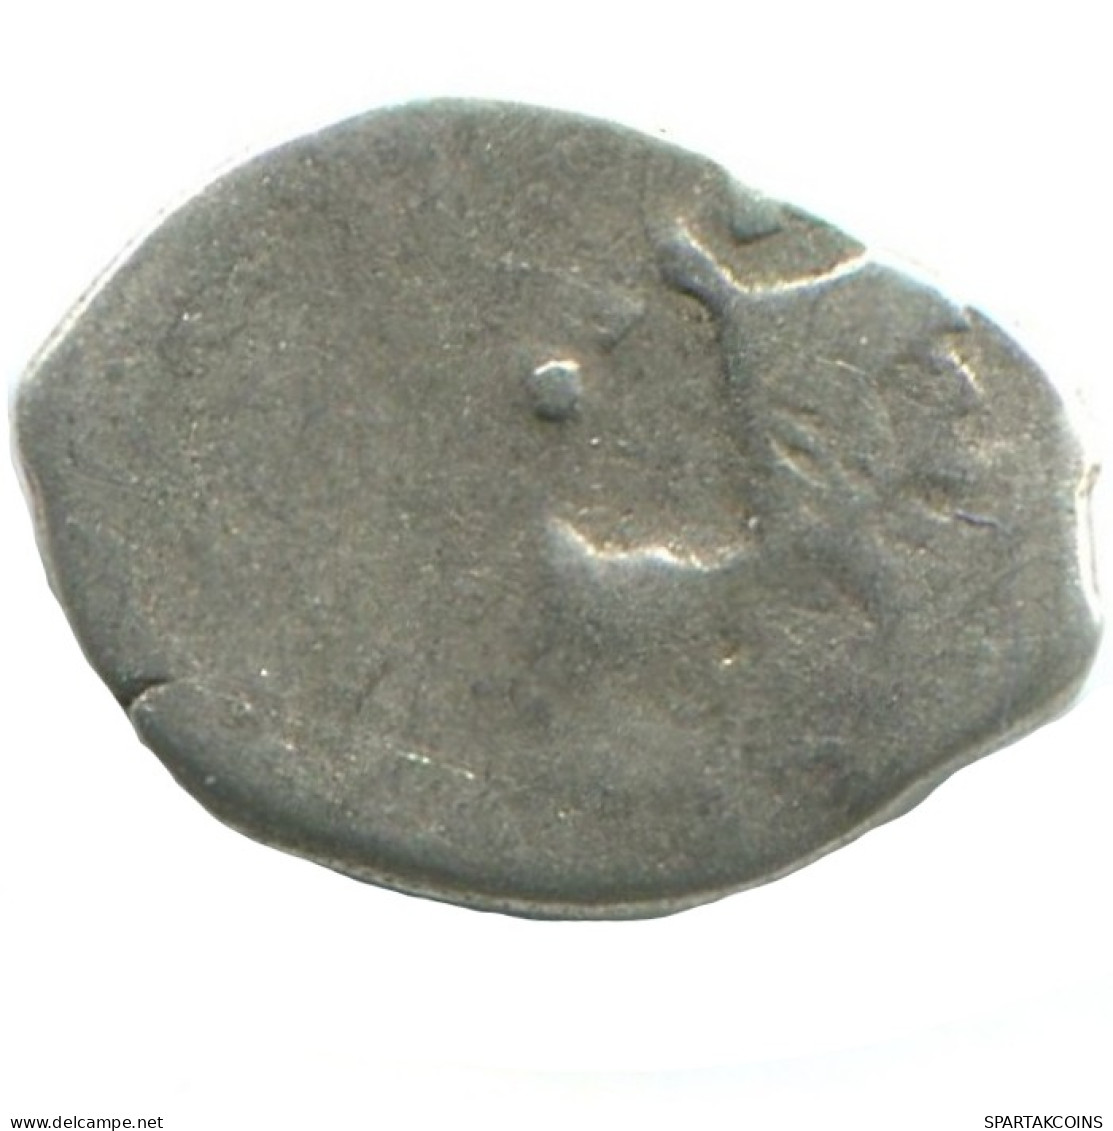 RUSIA RUSSIA 1702 KOPECK PETER I OLD Mint MOSCOW PLATA 0.3g/10mm #AB546.10.E.A - Russia